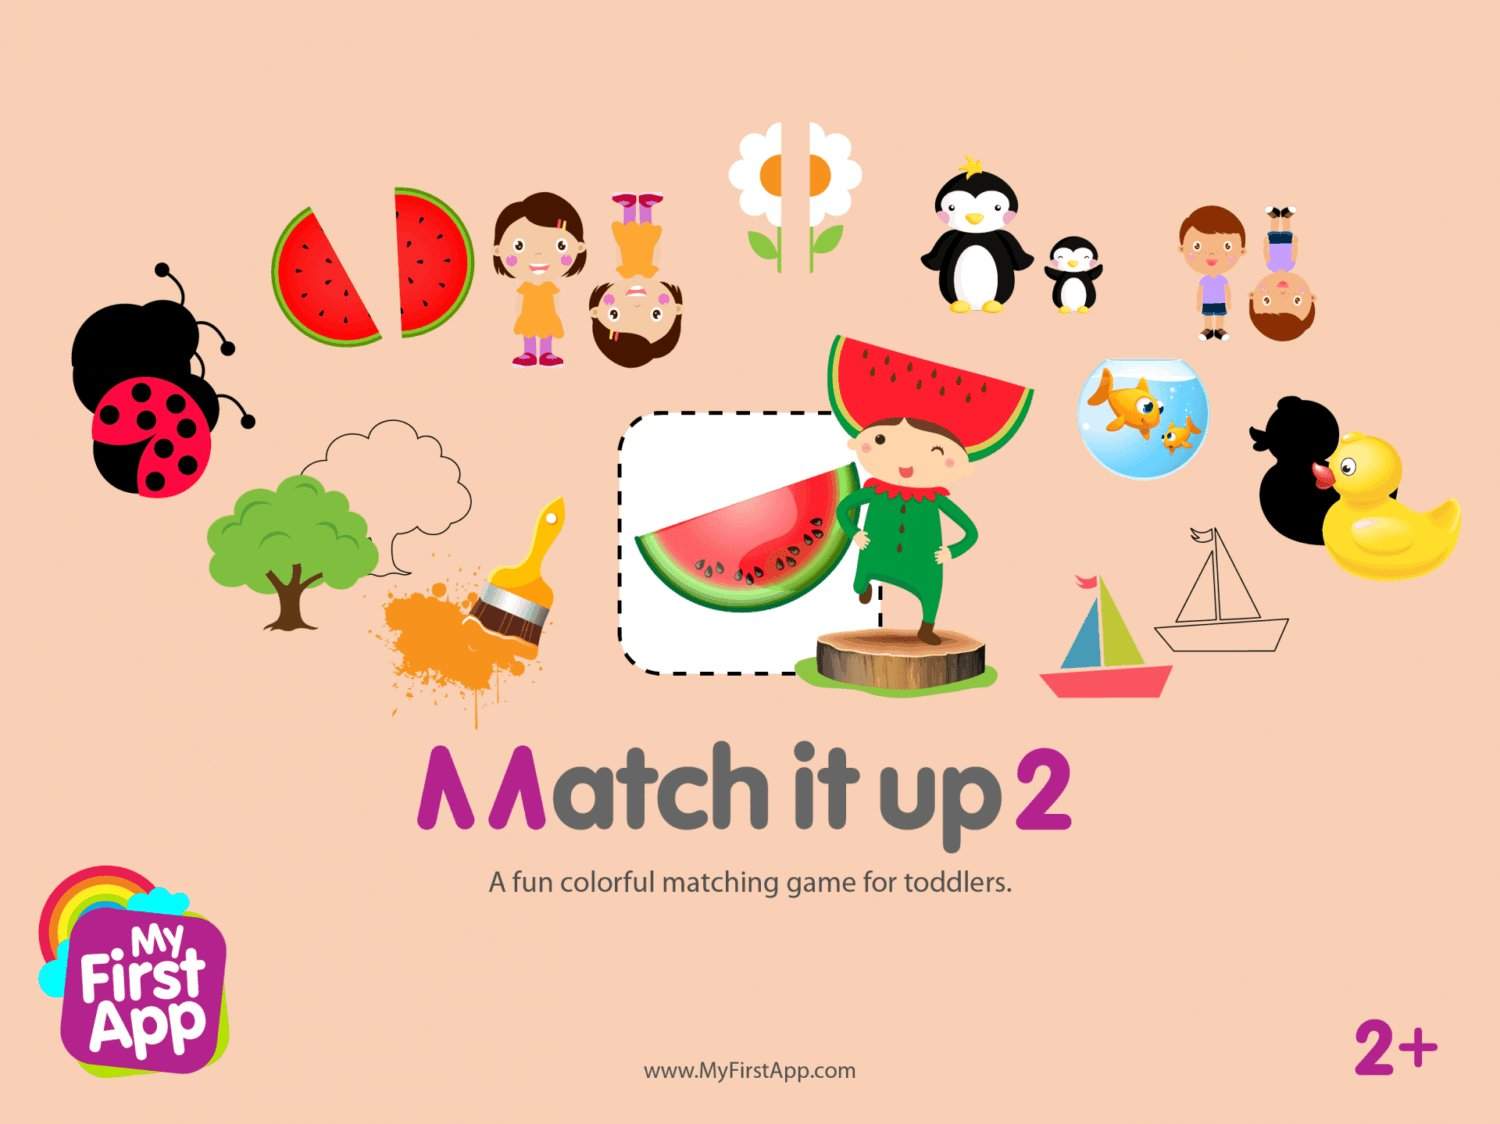 A fun colorful matching game for toddlers.